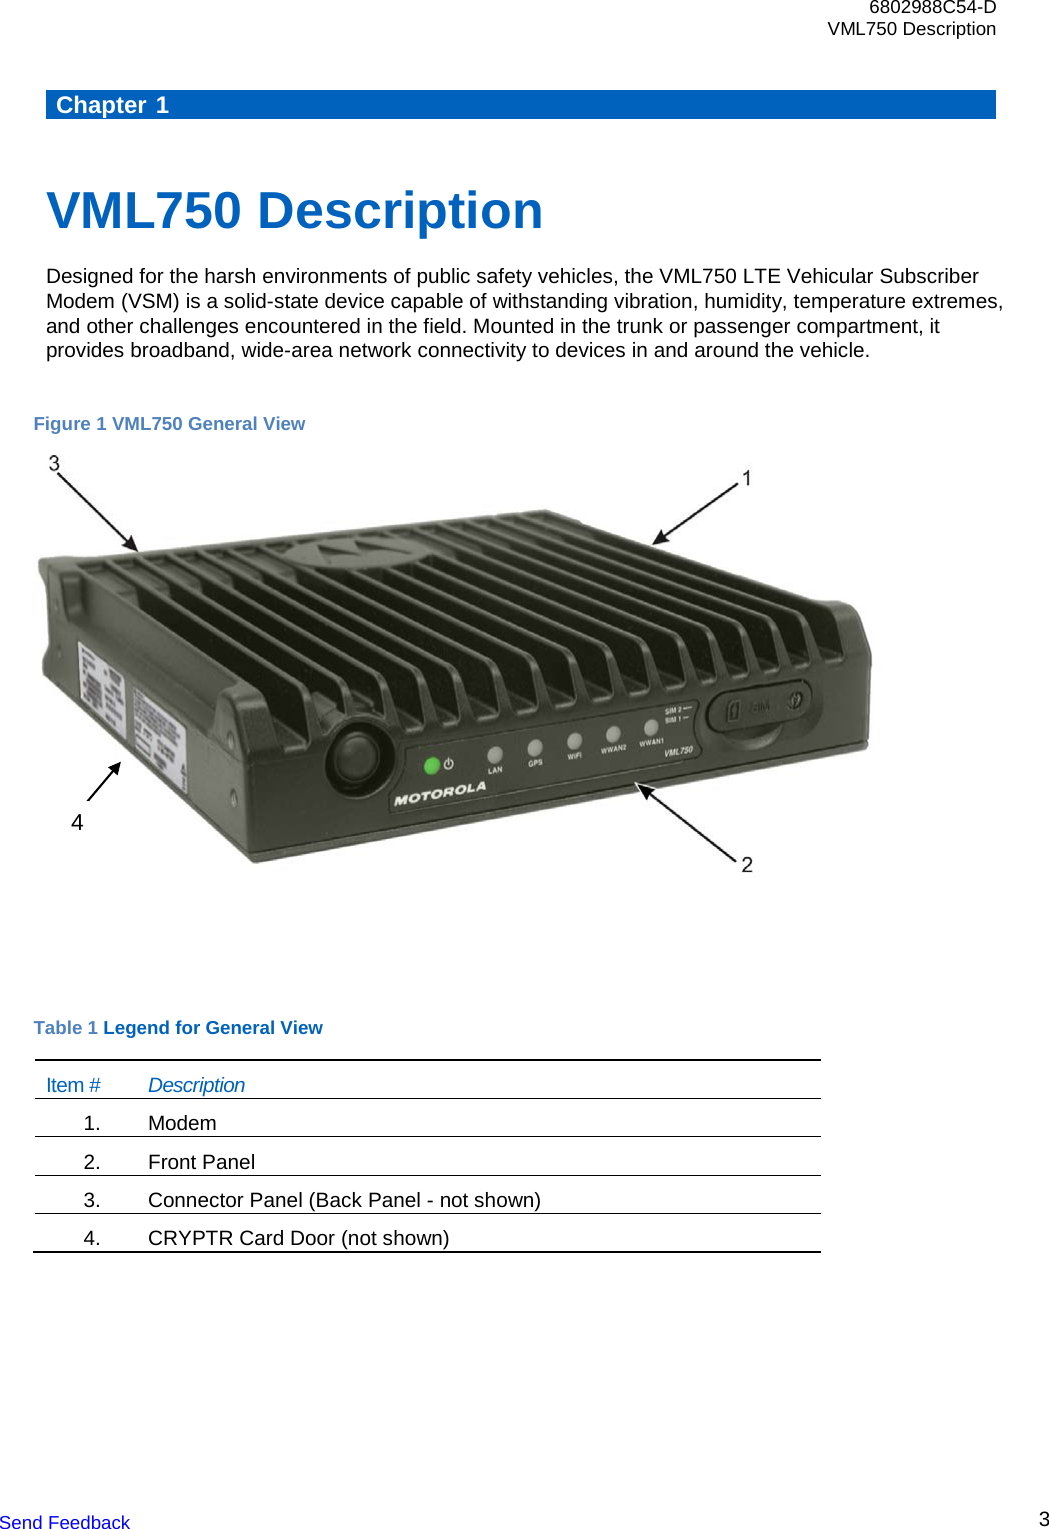 6802988C54-D VML750 Description Send Feedback  3      Chapter 1    VML750 Description Designed for the harsh environments of public safety vehicles, the VML750 LTE Vehicular Subscriber Modem (VSM) is a solid-state device capable of withstanding vibration, humidity, temperature extremes, and other challenges encountered in the field. Mounted in the trunk or passenger compartment, it provides broadband, wide-area network connectivity to devices in and around the vehicle.  Figure 1 VML750 General View      Table 1 Legend for General View Item # Description 1.   Modem 2.   Front Panel  3.   Connector Panel (Back Panel - not shown) 4.   CRYPTR Card Door (not shown)  4 